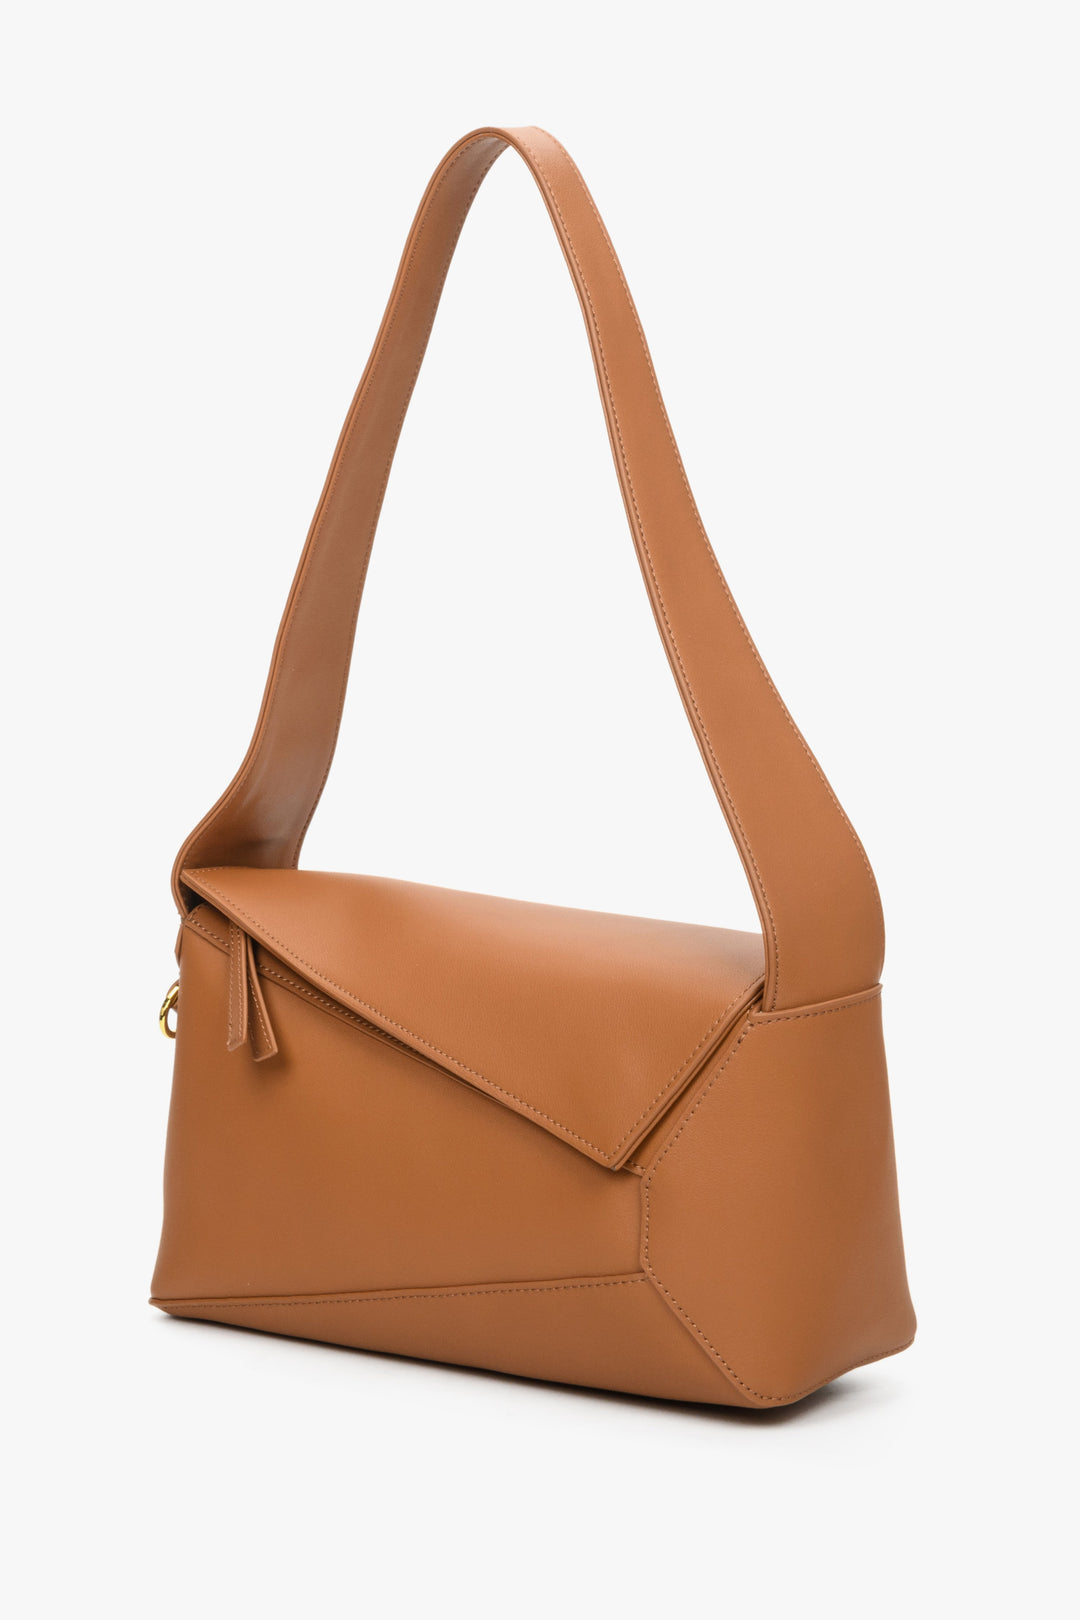 Women's small brown handbag made of genuine leather by Estro.